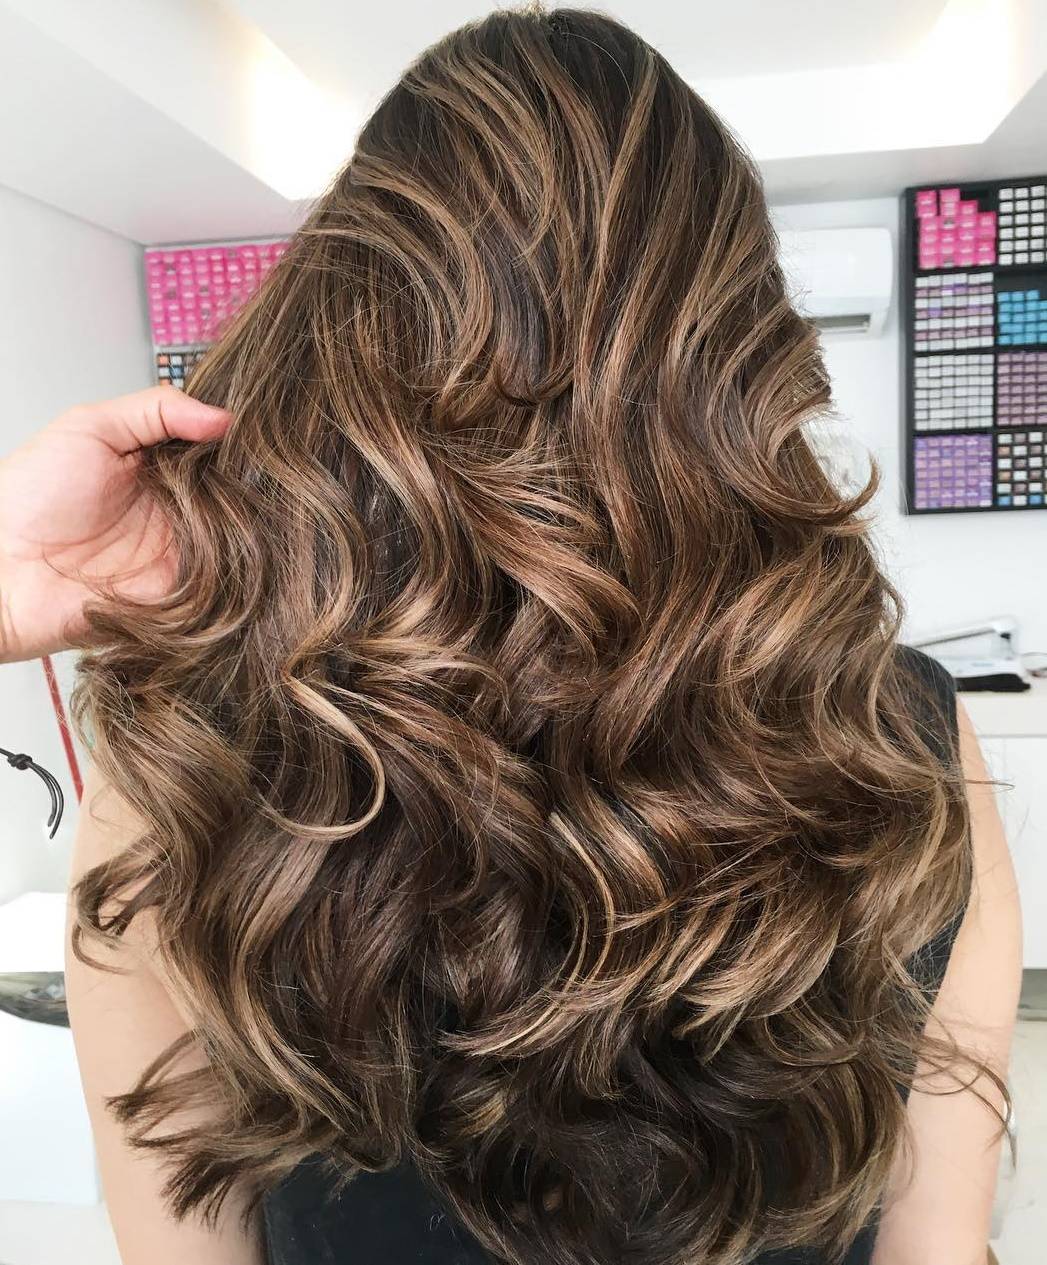 40 Top Long Hairstyles for Women to Keep up with Trends in 2021